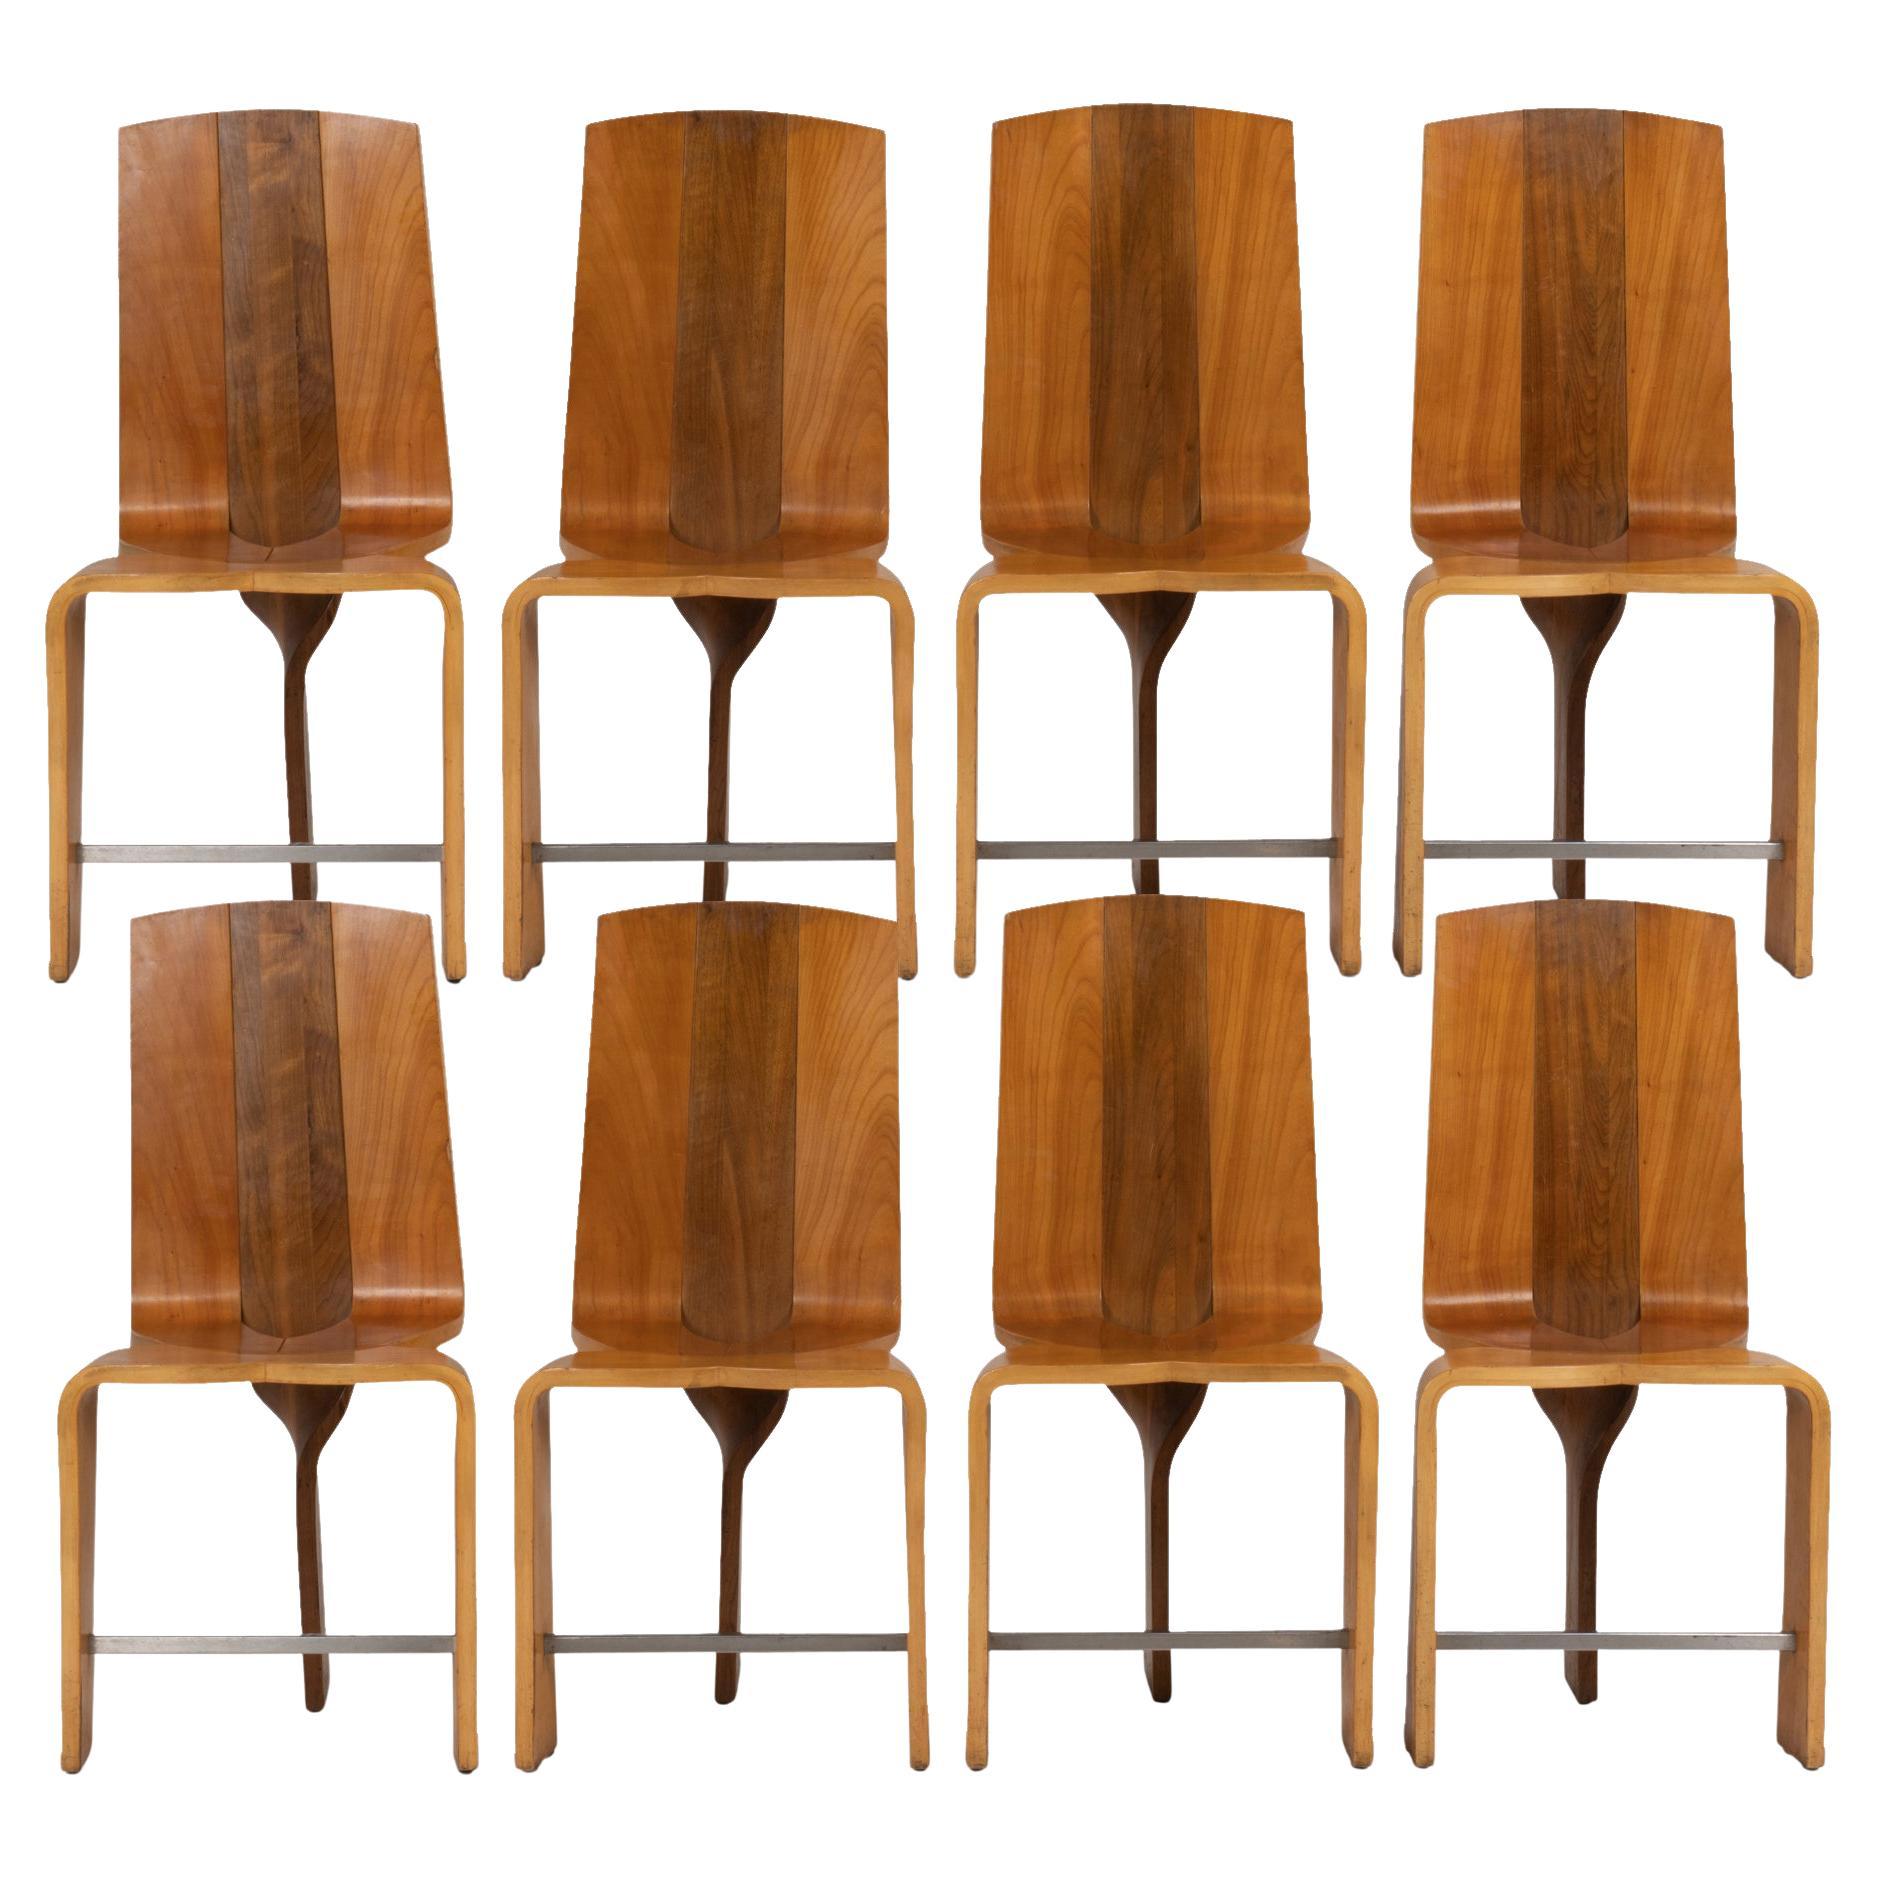 Series of Eight Chairs Blond Cherry Wood, 1980s For Sale